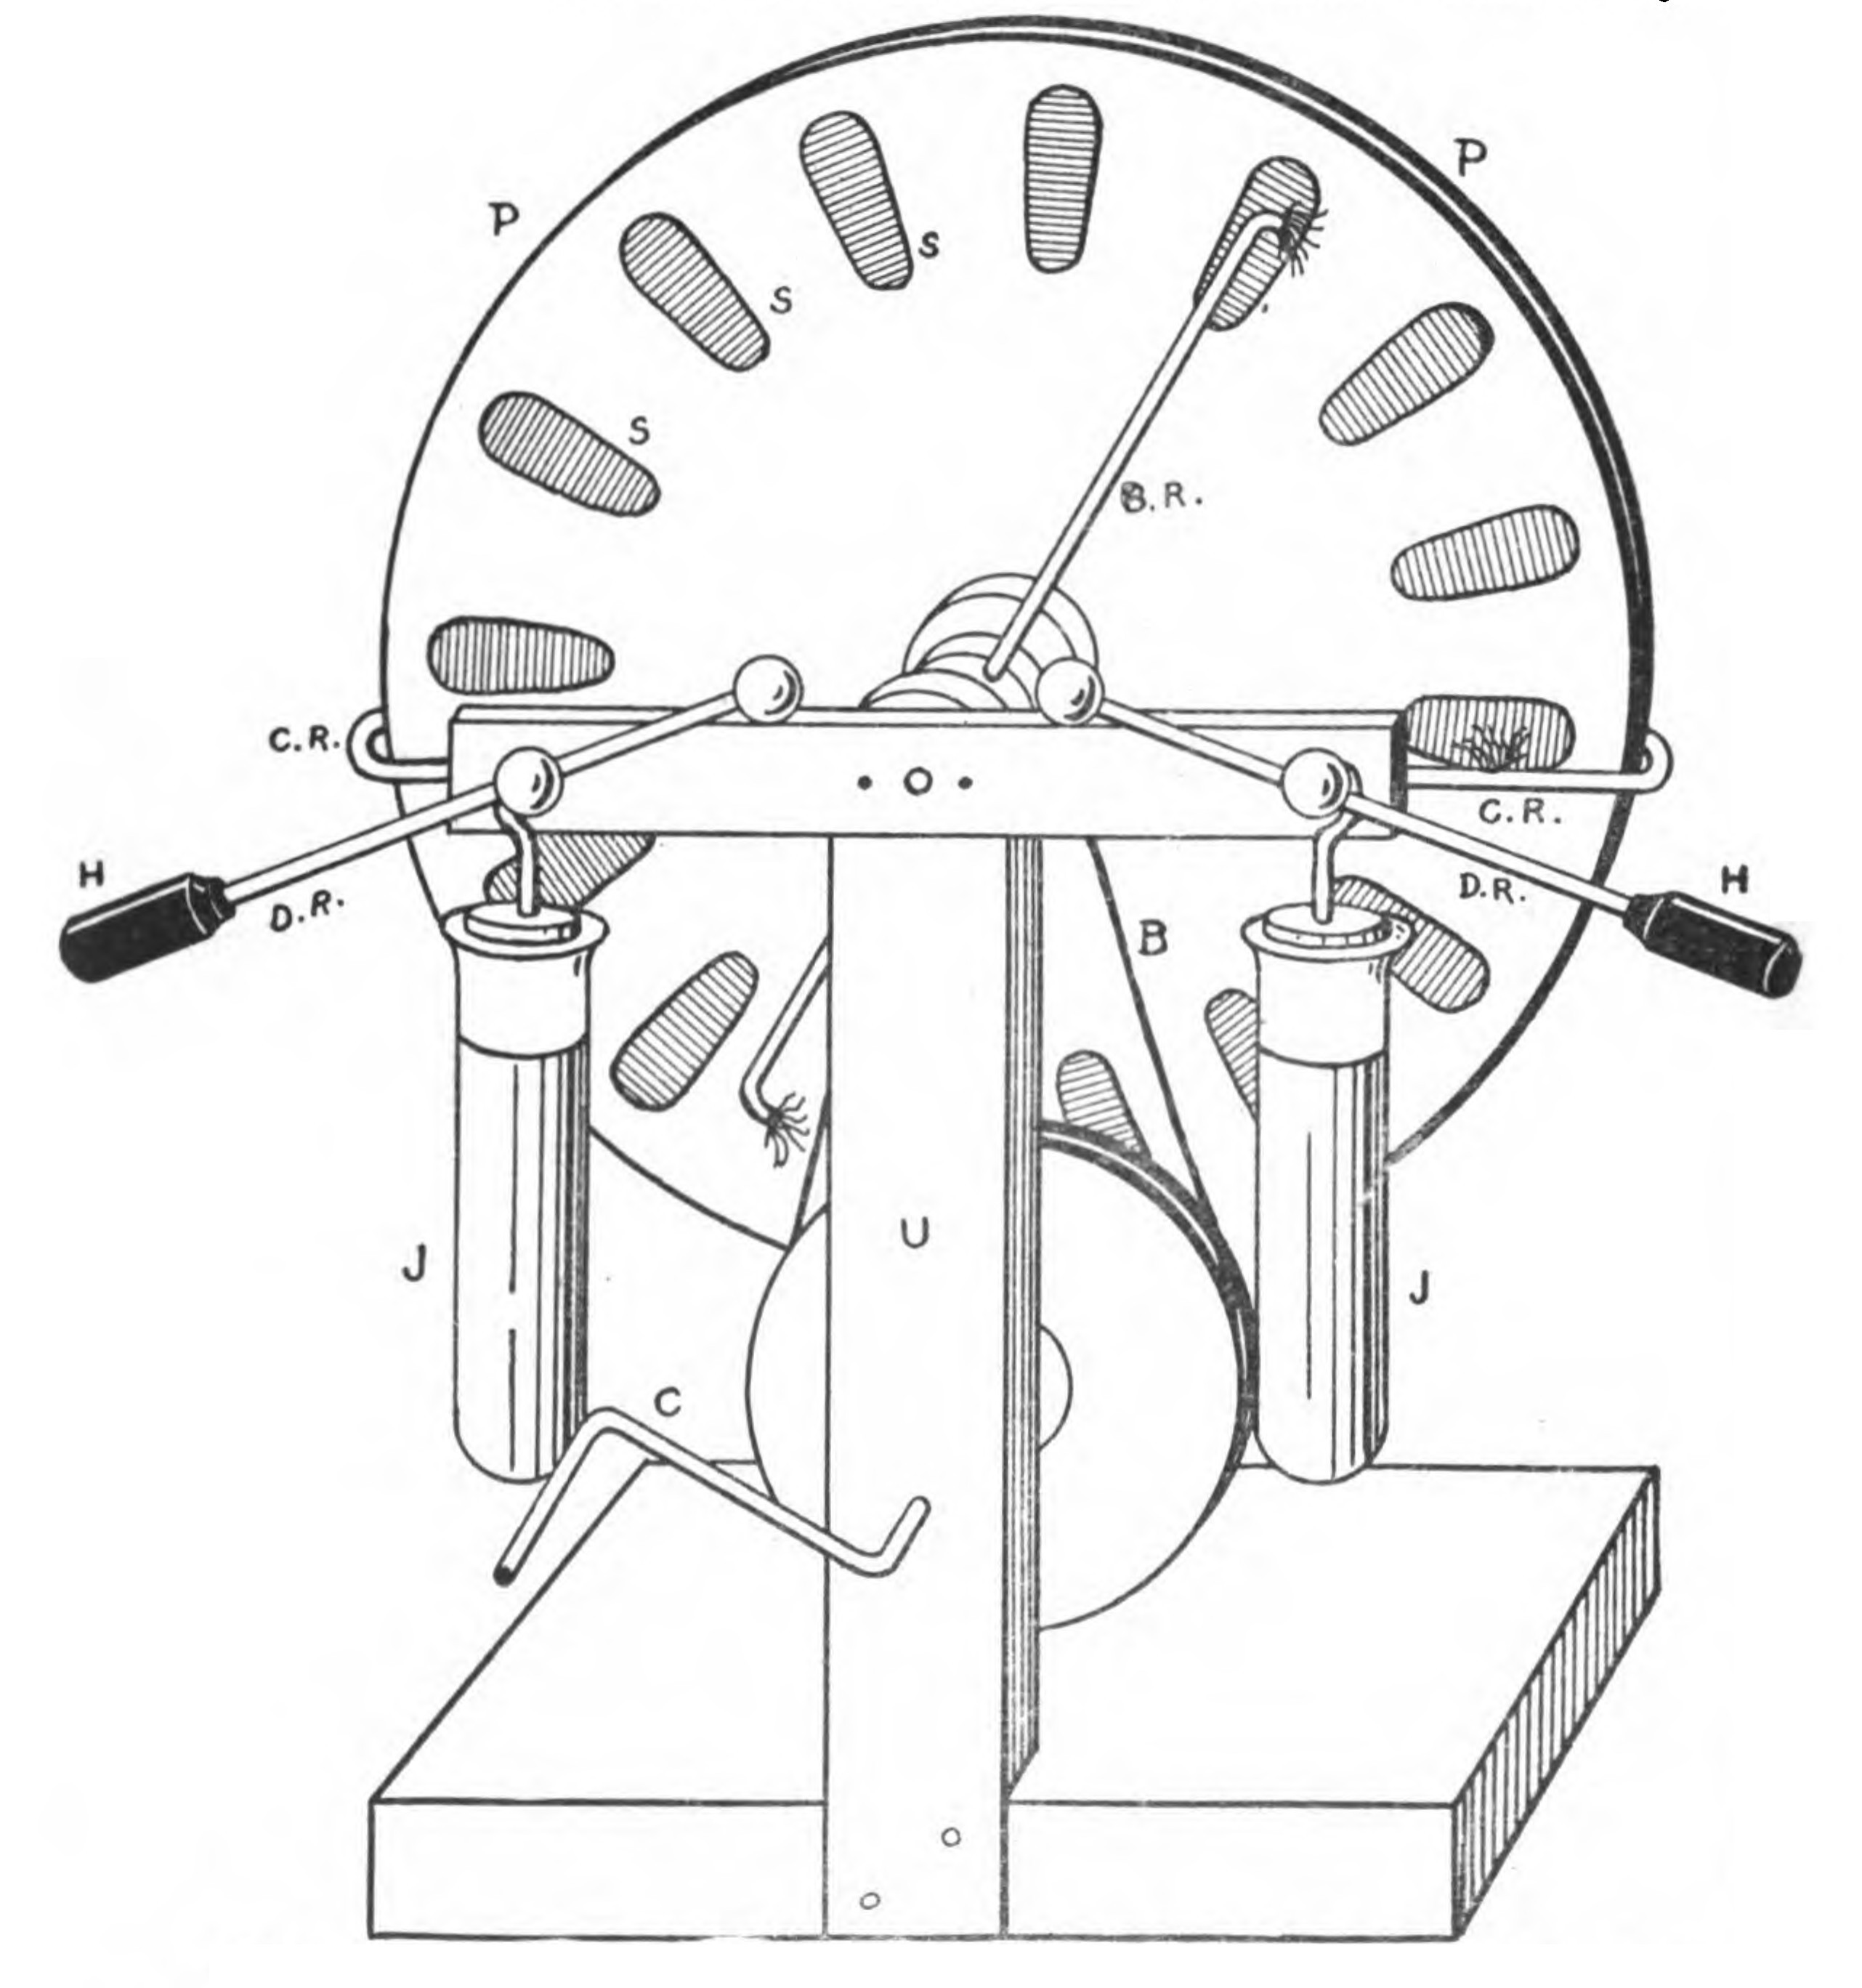 FIG. 1.—A simple Wimshurst Machine